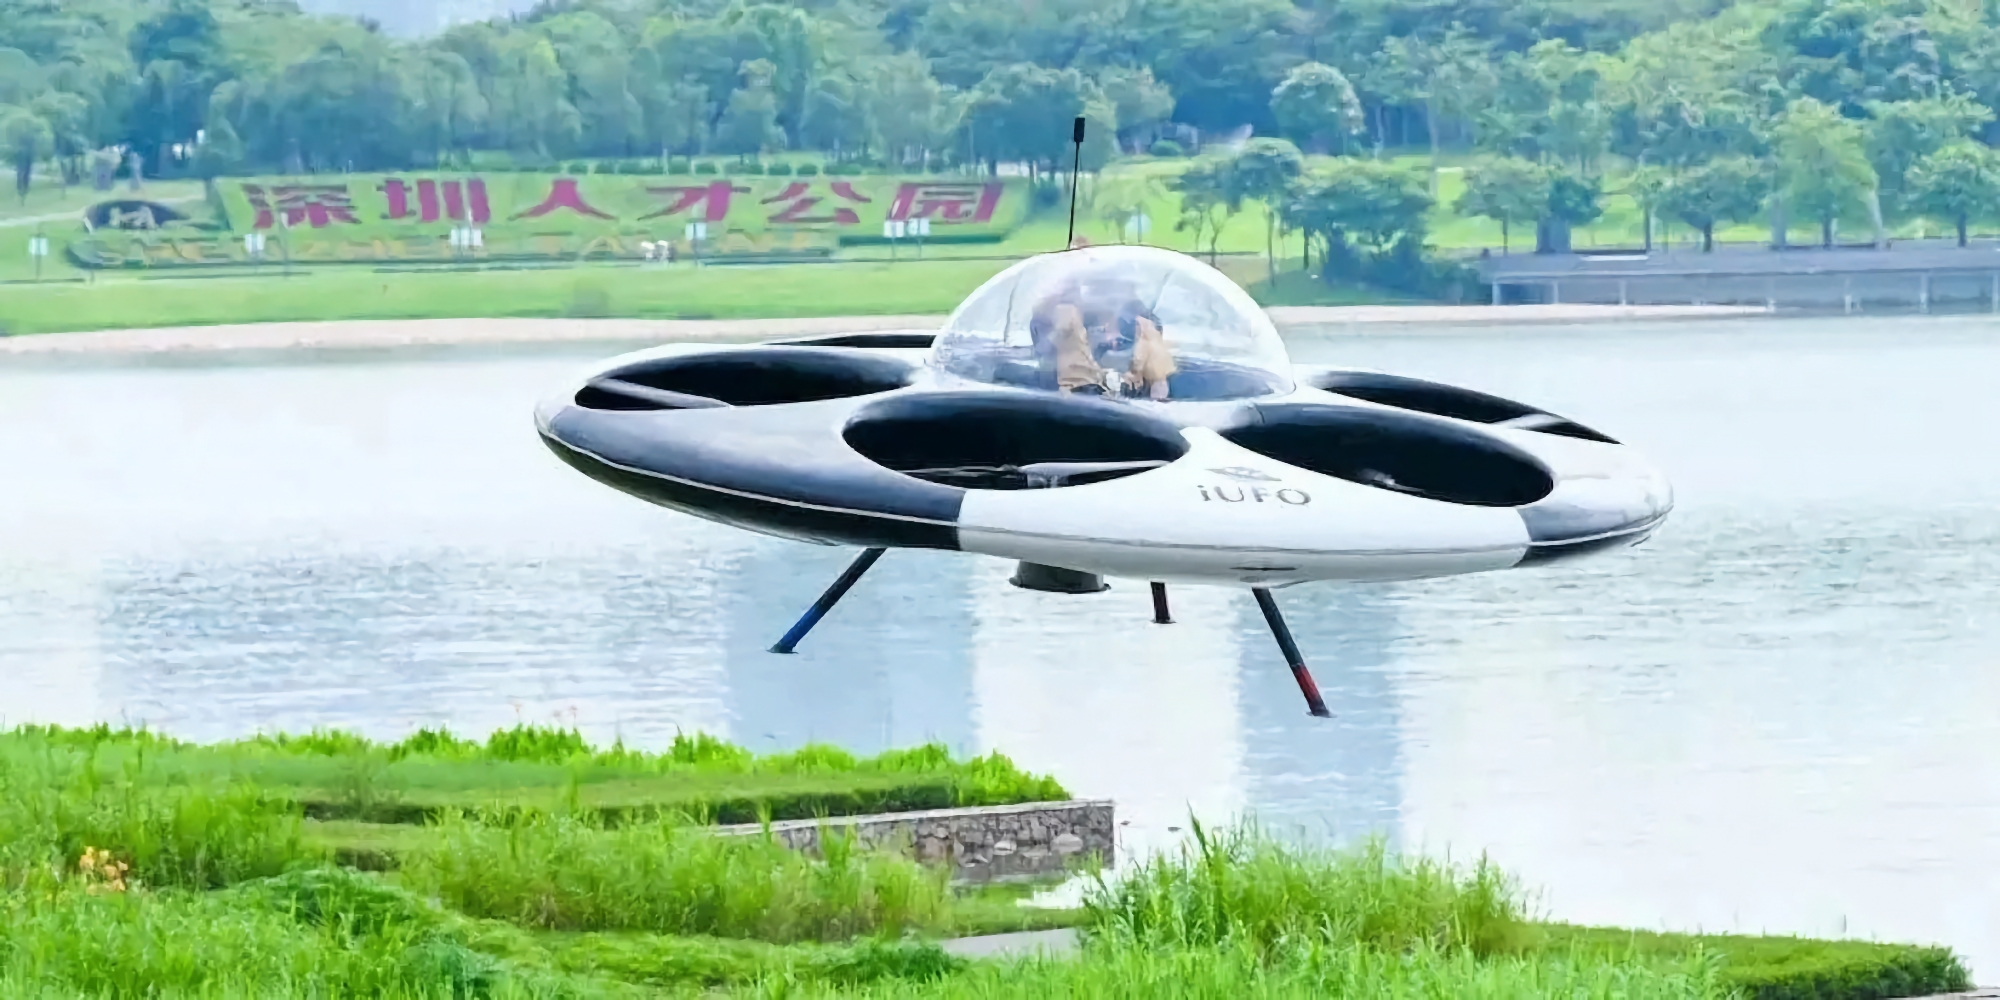 Shenzen UFO Flying Saucer Technology has revealed a passenger drone in the form of a flying saucer